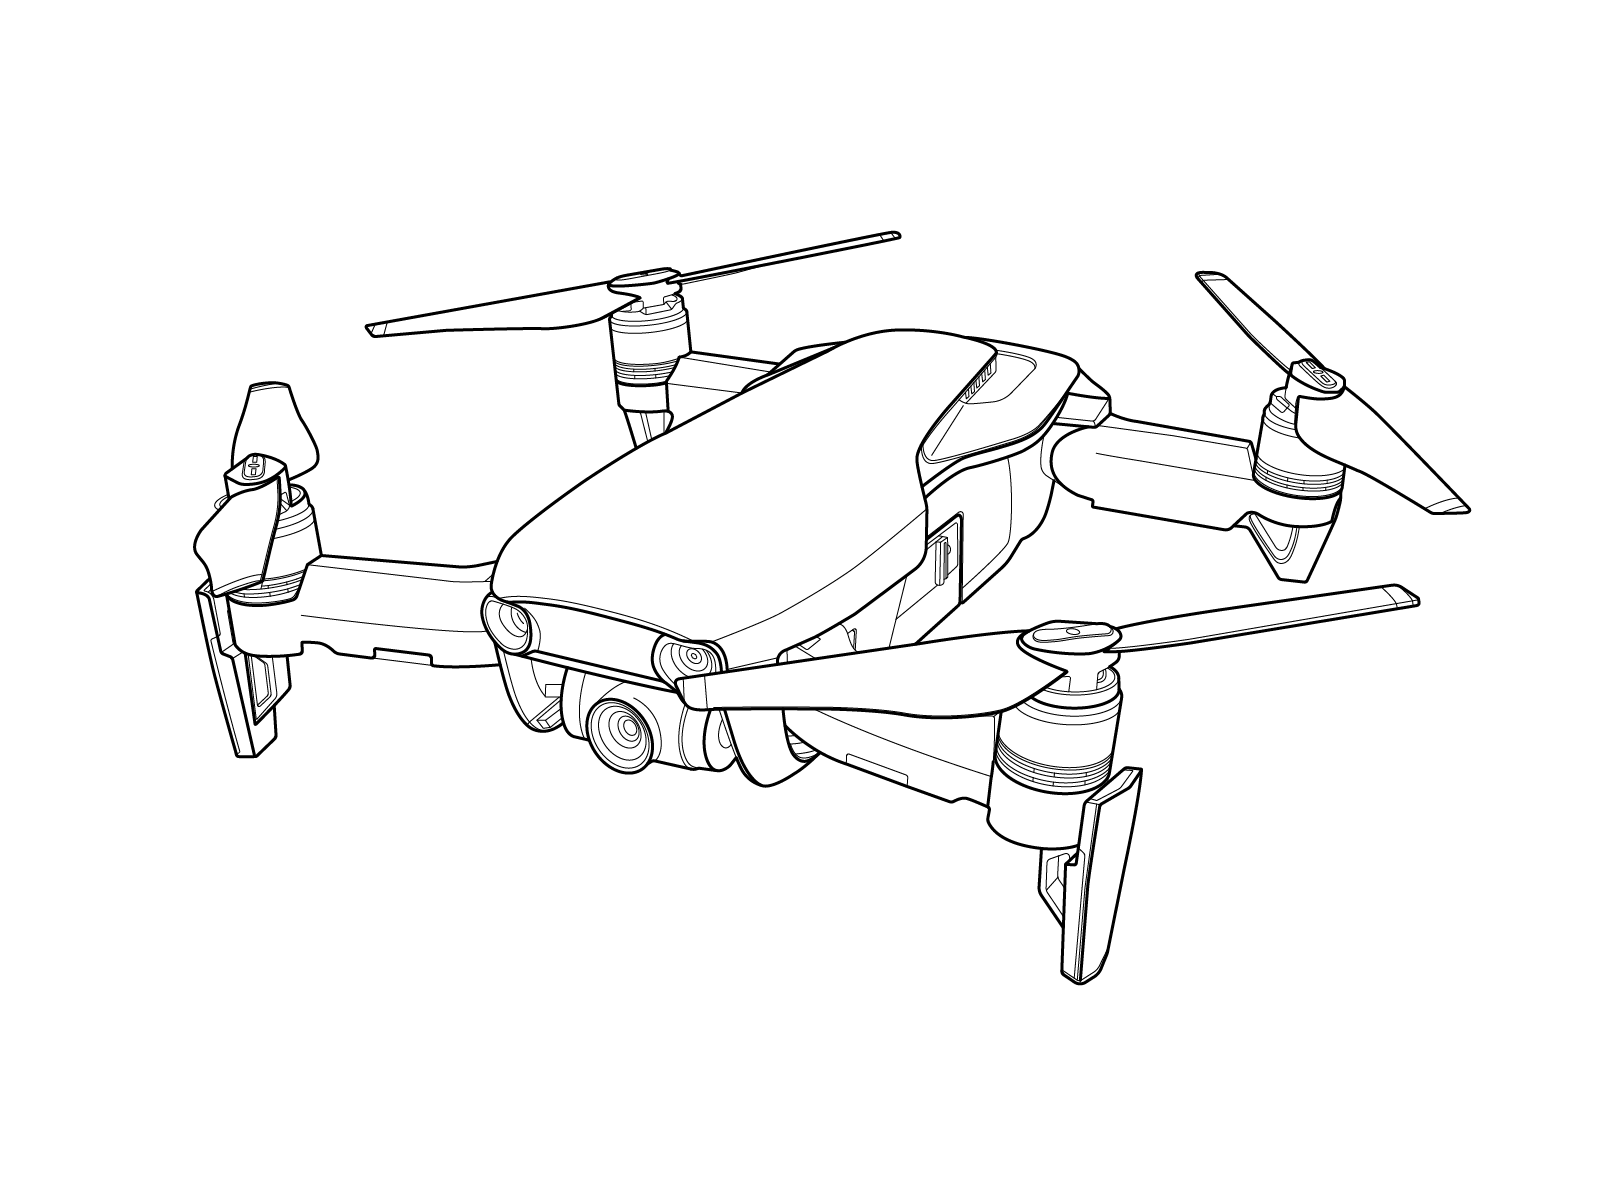 Drone Drawing Artistic Sketching